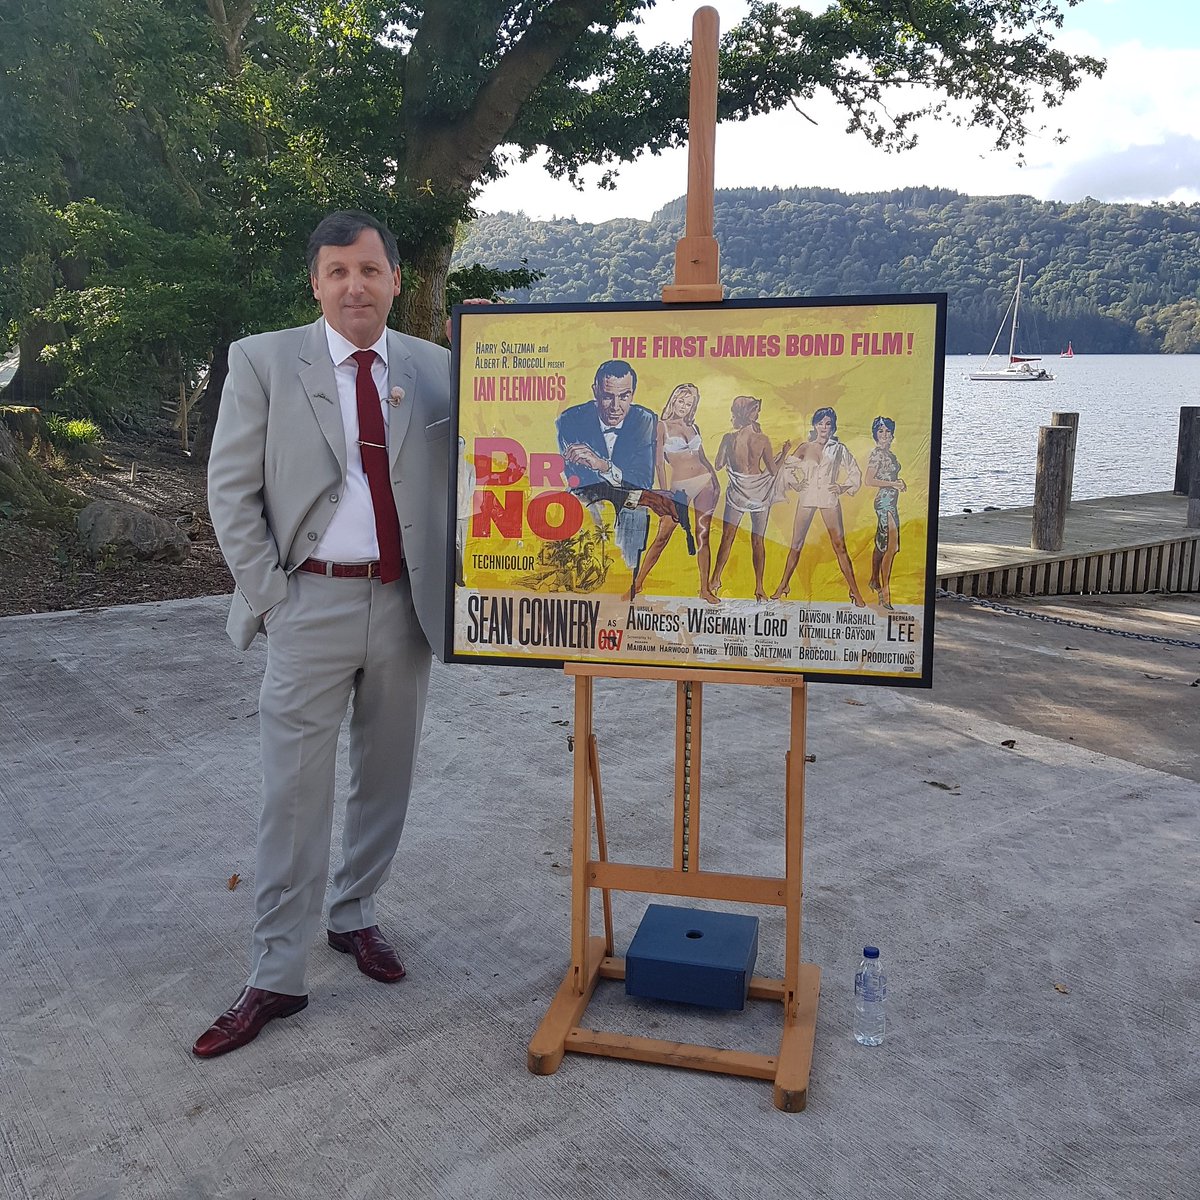 This week's Antiques Roadshow comes from Windermere Jetty where I look at a Dr. No poster scraped off a wall. #windermerejettymuseum 
@BBC_ARoadshow 
@jamesbond007
#JamesBond @jamesbondlive